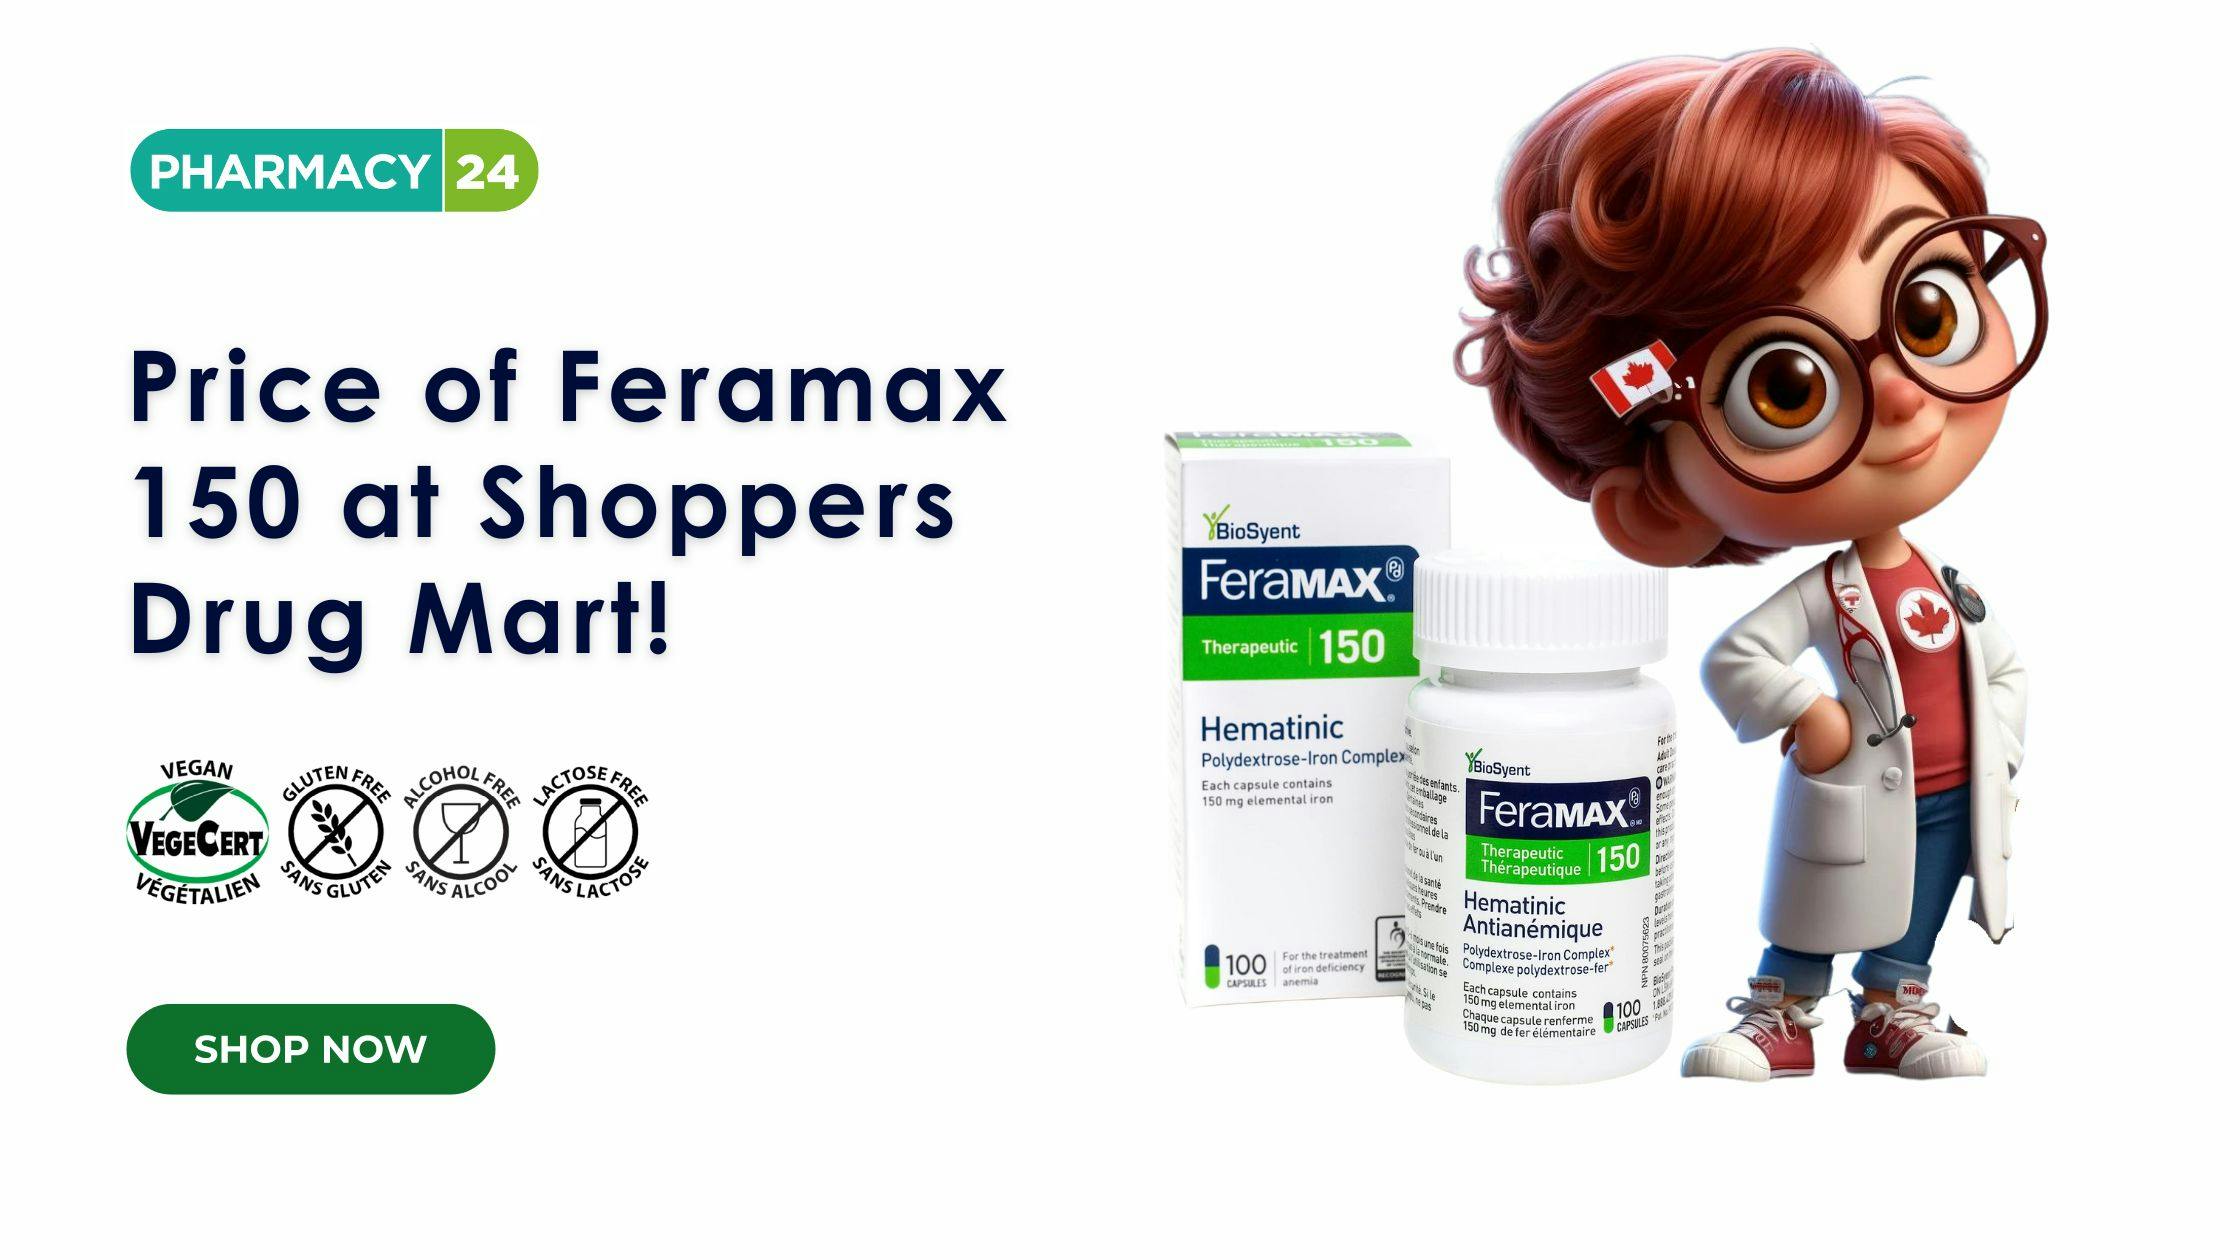 What is the price of Feramax 150 at Shoppers Drug Mart?